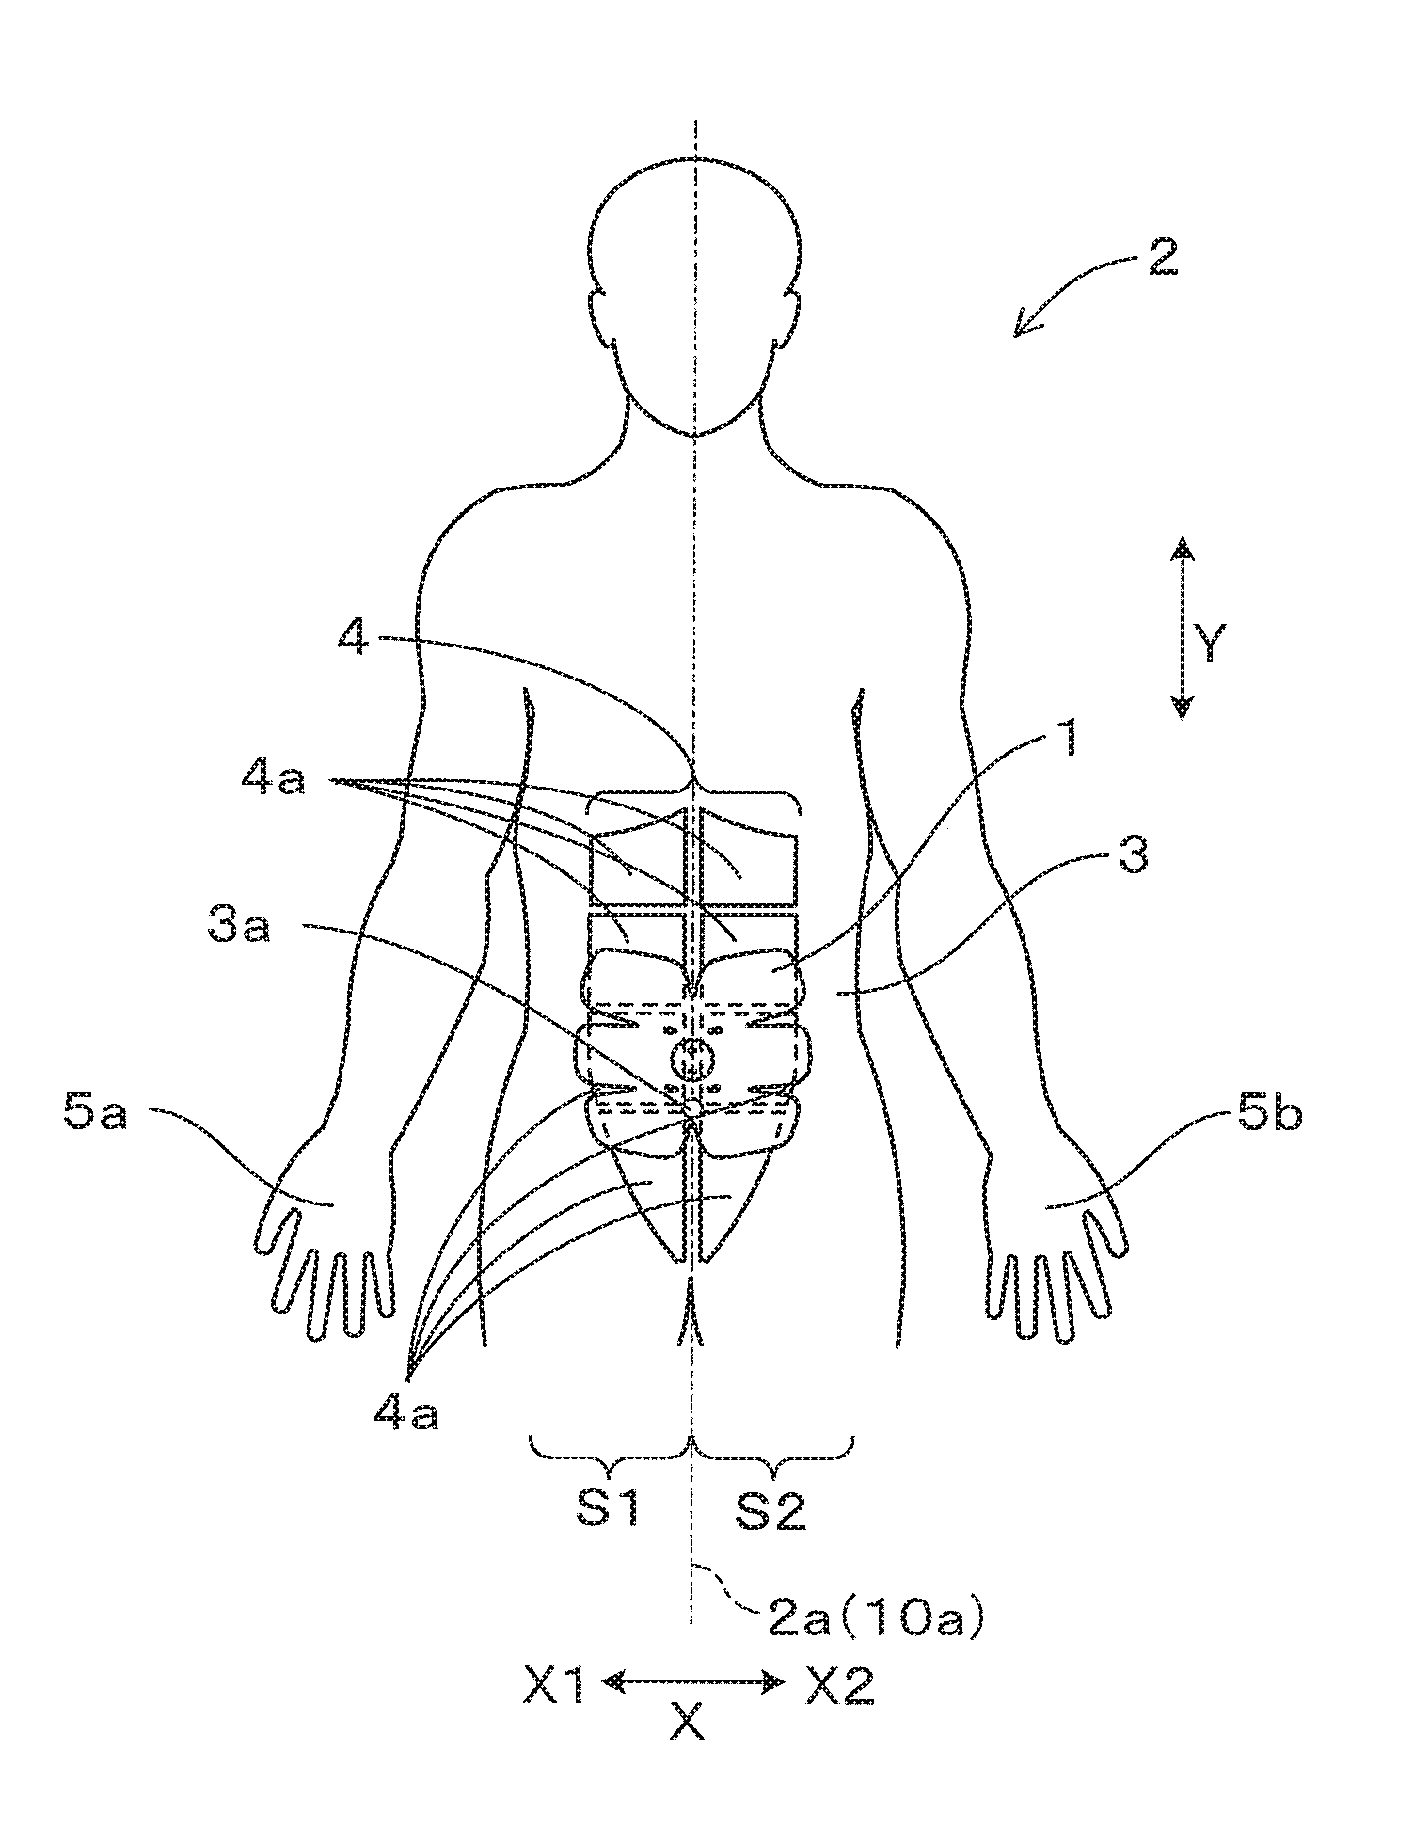 Electrical muscle stimulation device